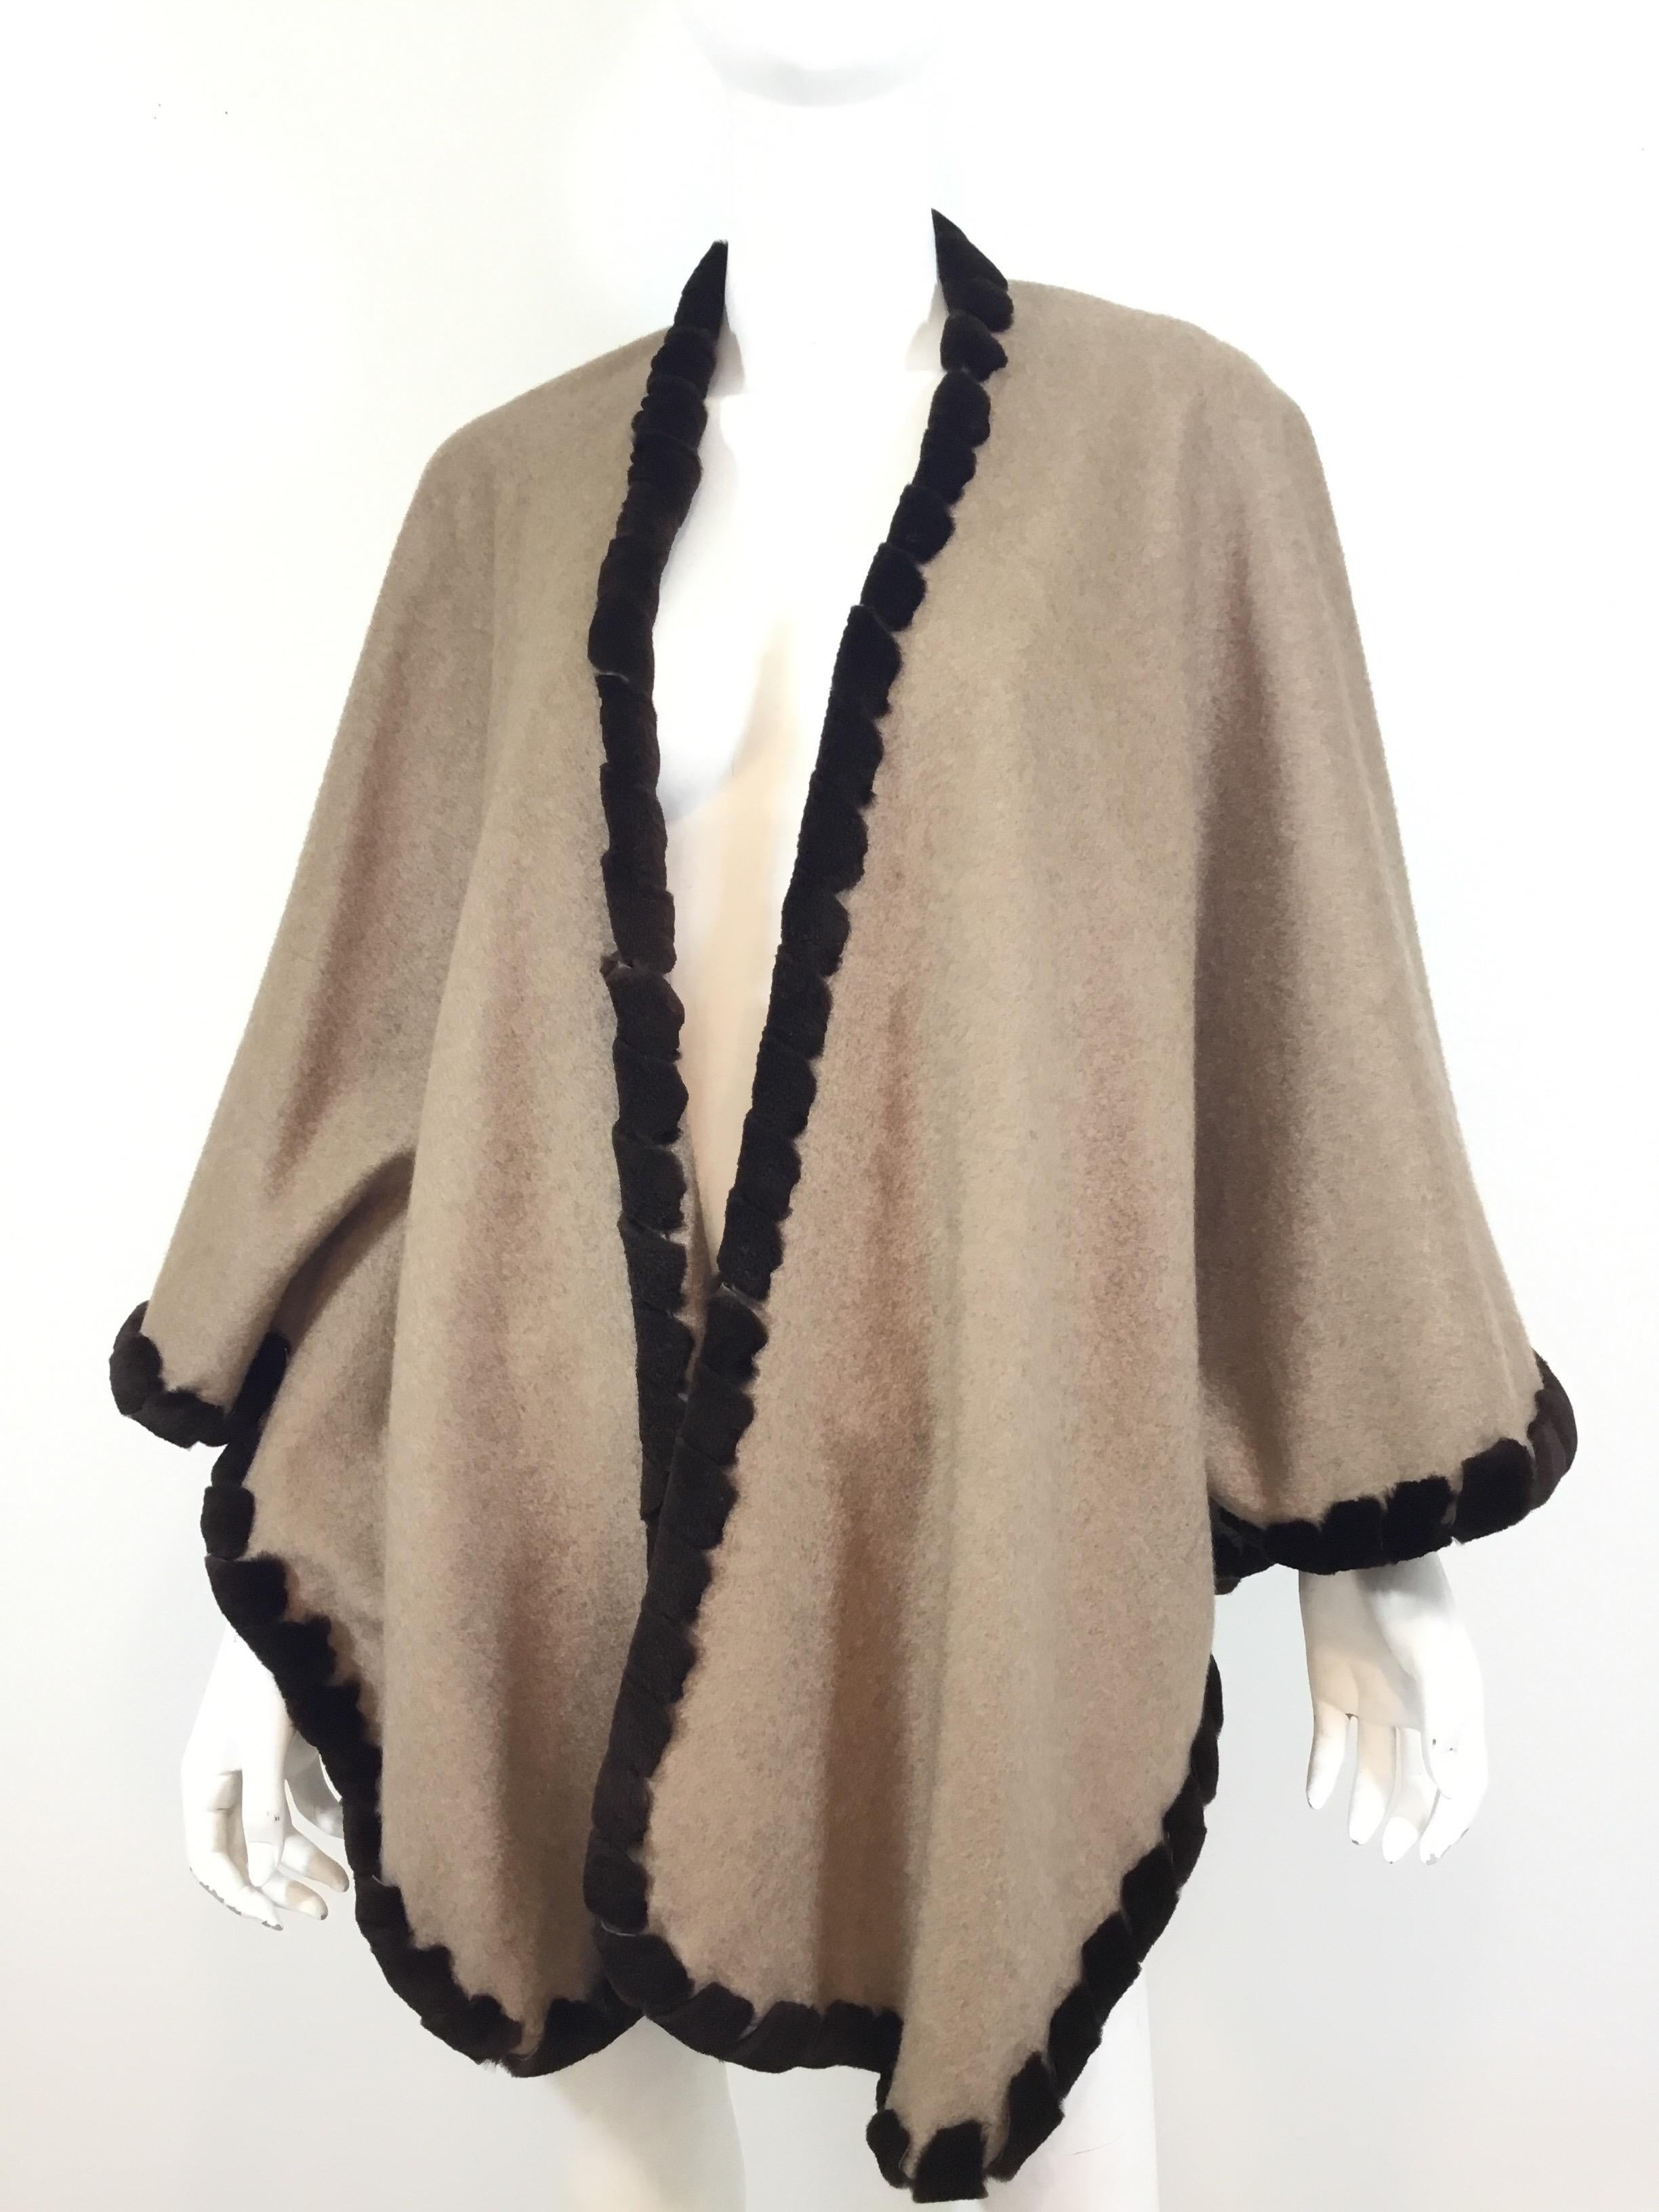 Loro Piana cashmere cape featured in a taupe color with a brown sheared mink trim. Optional buttons to create an insert for arms. Estimated retail $10k. Made in Italy. 100% cashmere.

 Bust (laying flat) 38” across, length 30”